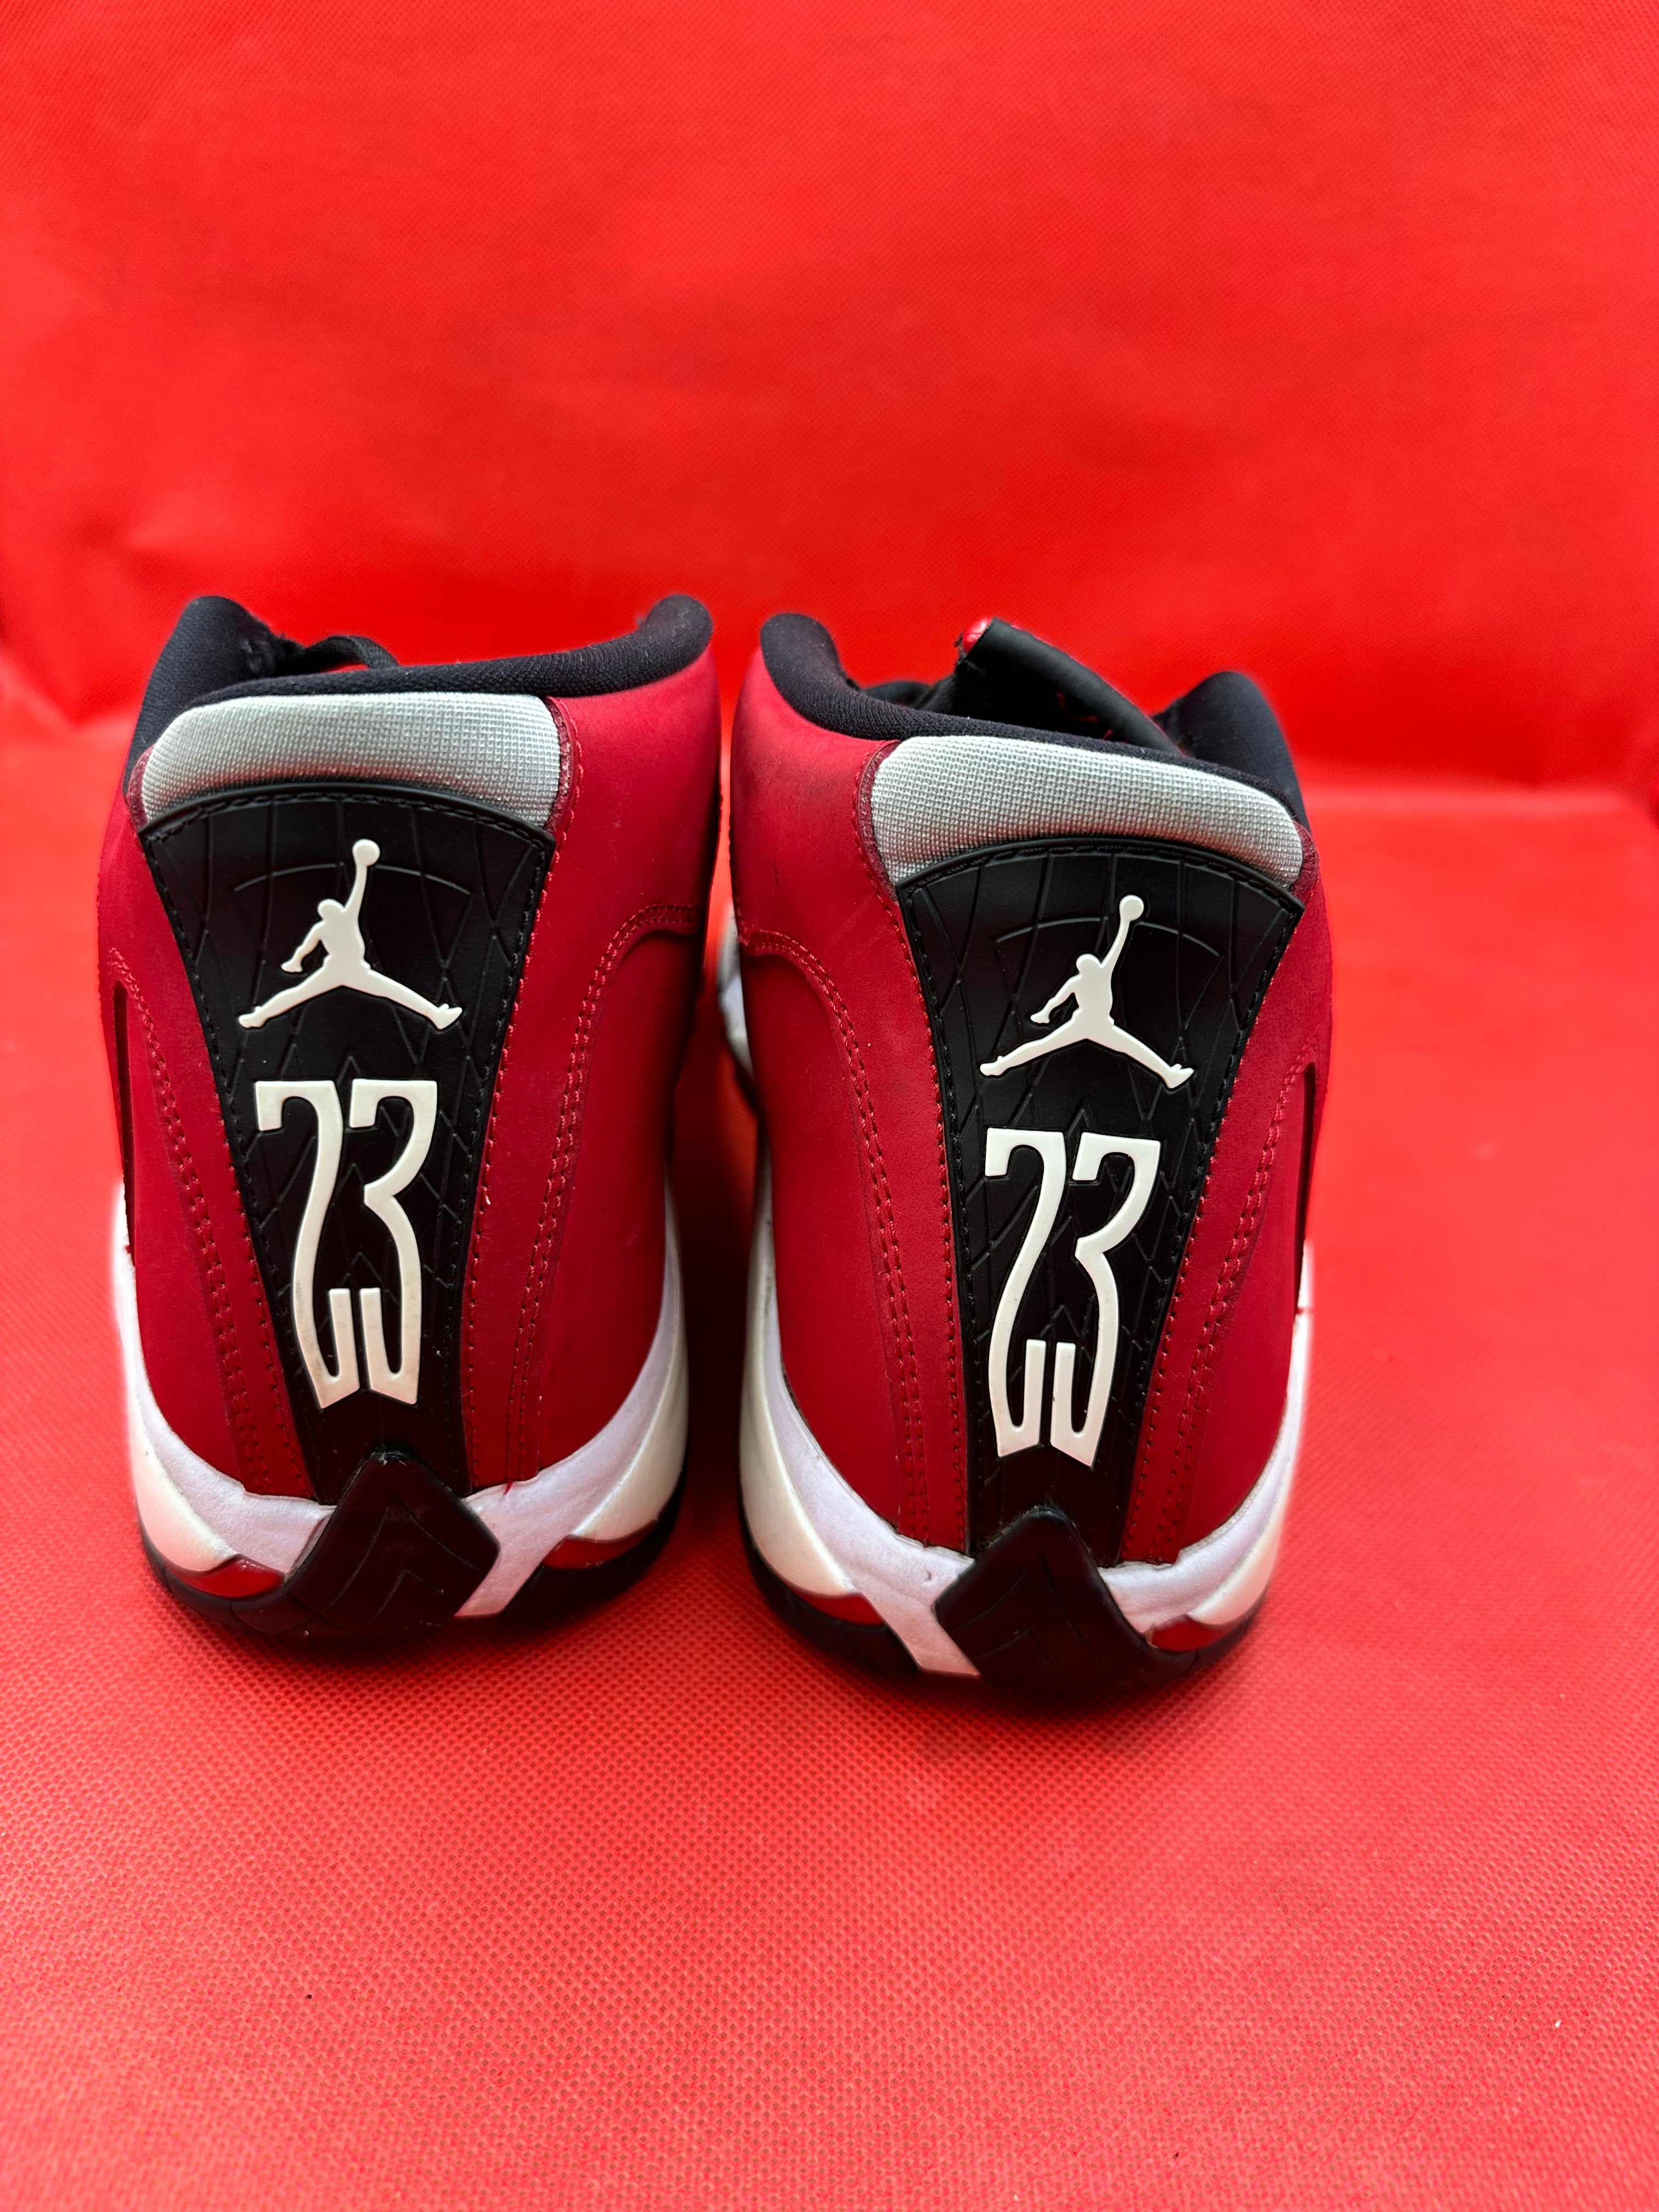 Gym Red 14s size 8.5